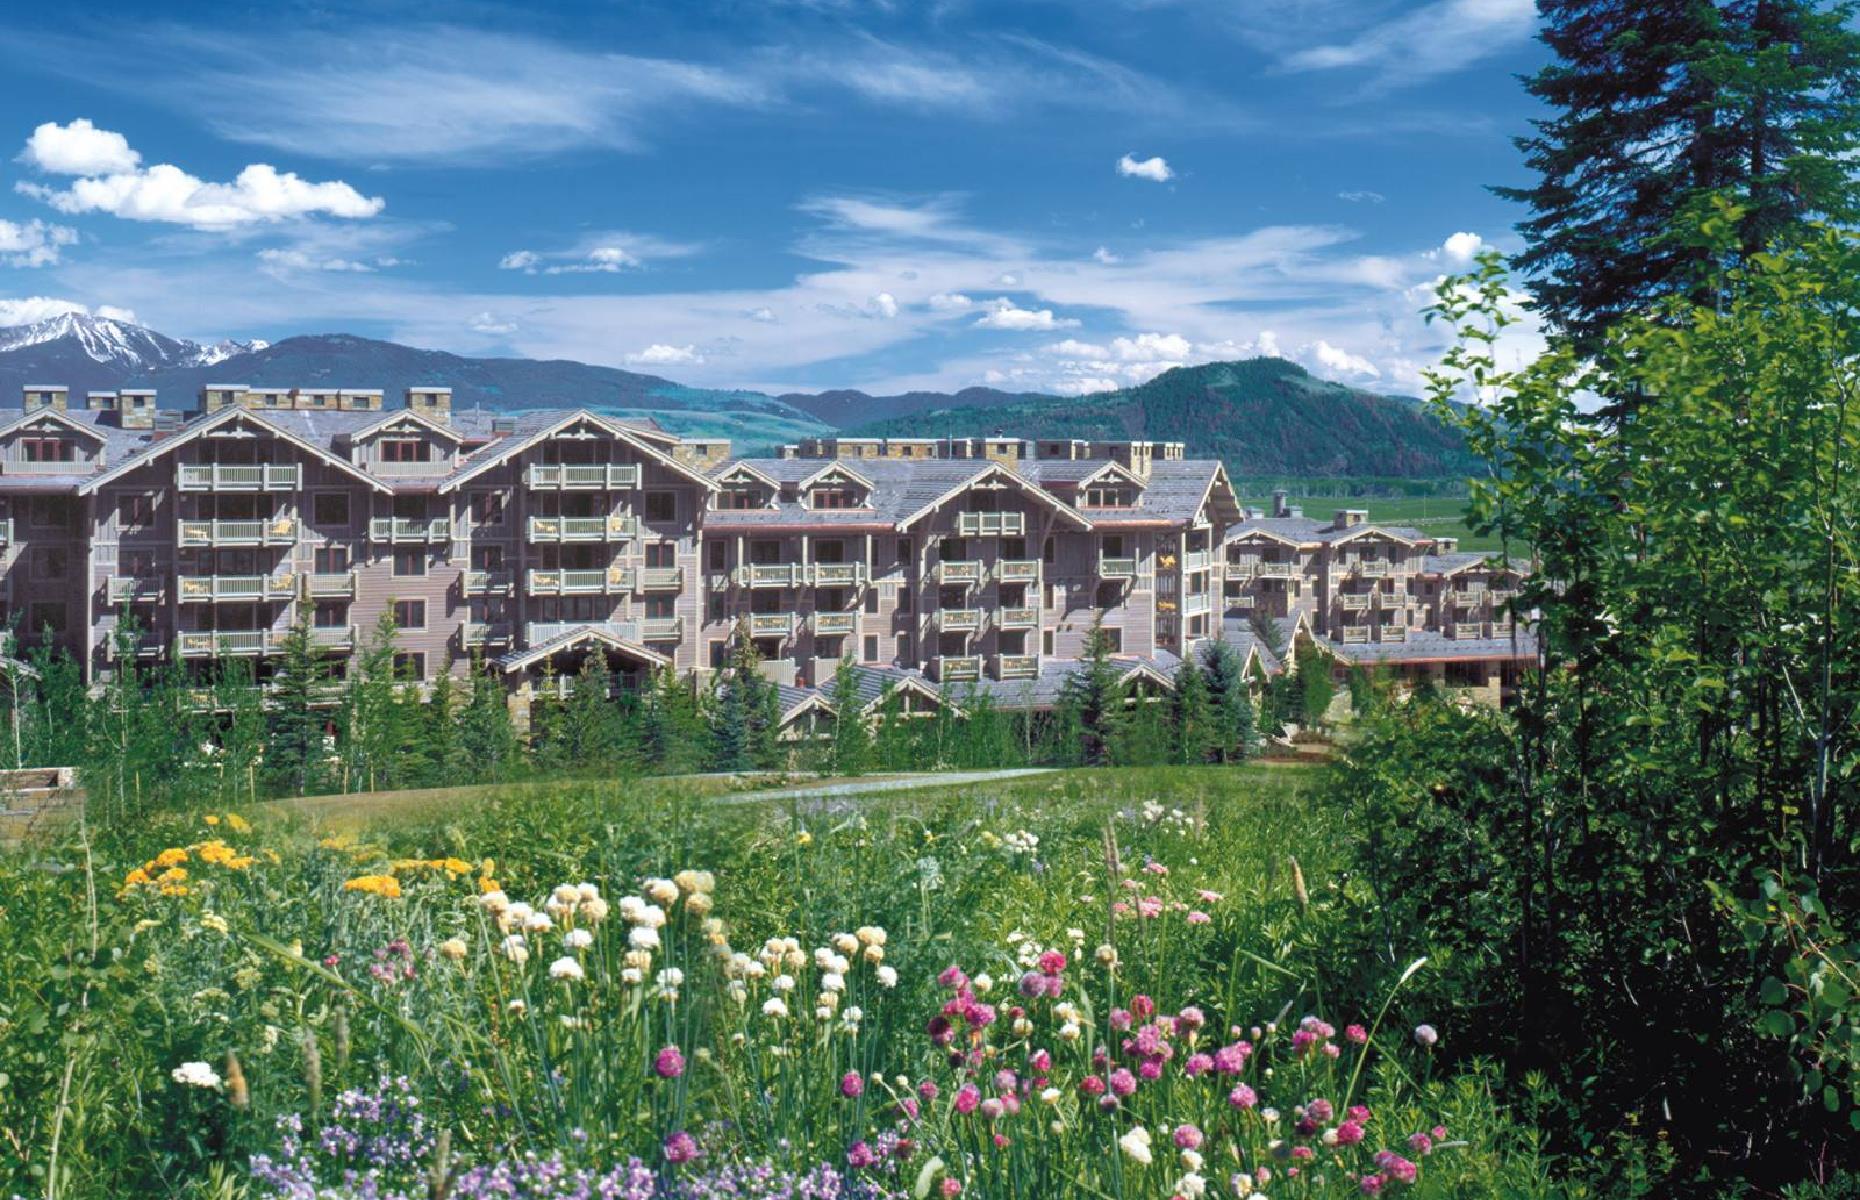 <p>This <a href="https://www.fourseasons.com/jacksonhole/">Wyoming resort</a> is a jewel in the awe-inspiring Grand Teton mountain range. The cleanly designed rooms look out onto the drama of the mountains, with the wilderness of both Grand Teton and Yellowstone national parks not far away. There’s plenty of wildlife to discover nearby, or guests can just enjoy the hotel itself, with amenities including a slew of restaurants and a hotel lounge, a full-service spa and a concierge team that will help arrange those outdoor adventures.</p>  <p><a href="https://www.loveexploring.com/galleries/113797/americas-best-beach-hotels-and-resorts?page=1"><strong>Love this? Now check out America's best beach hotels and resorts</strong></a></p>